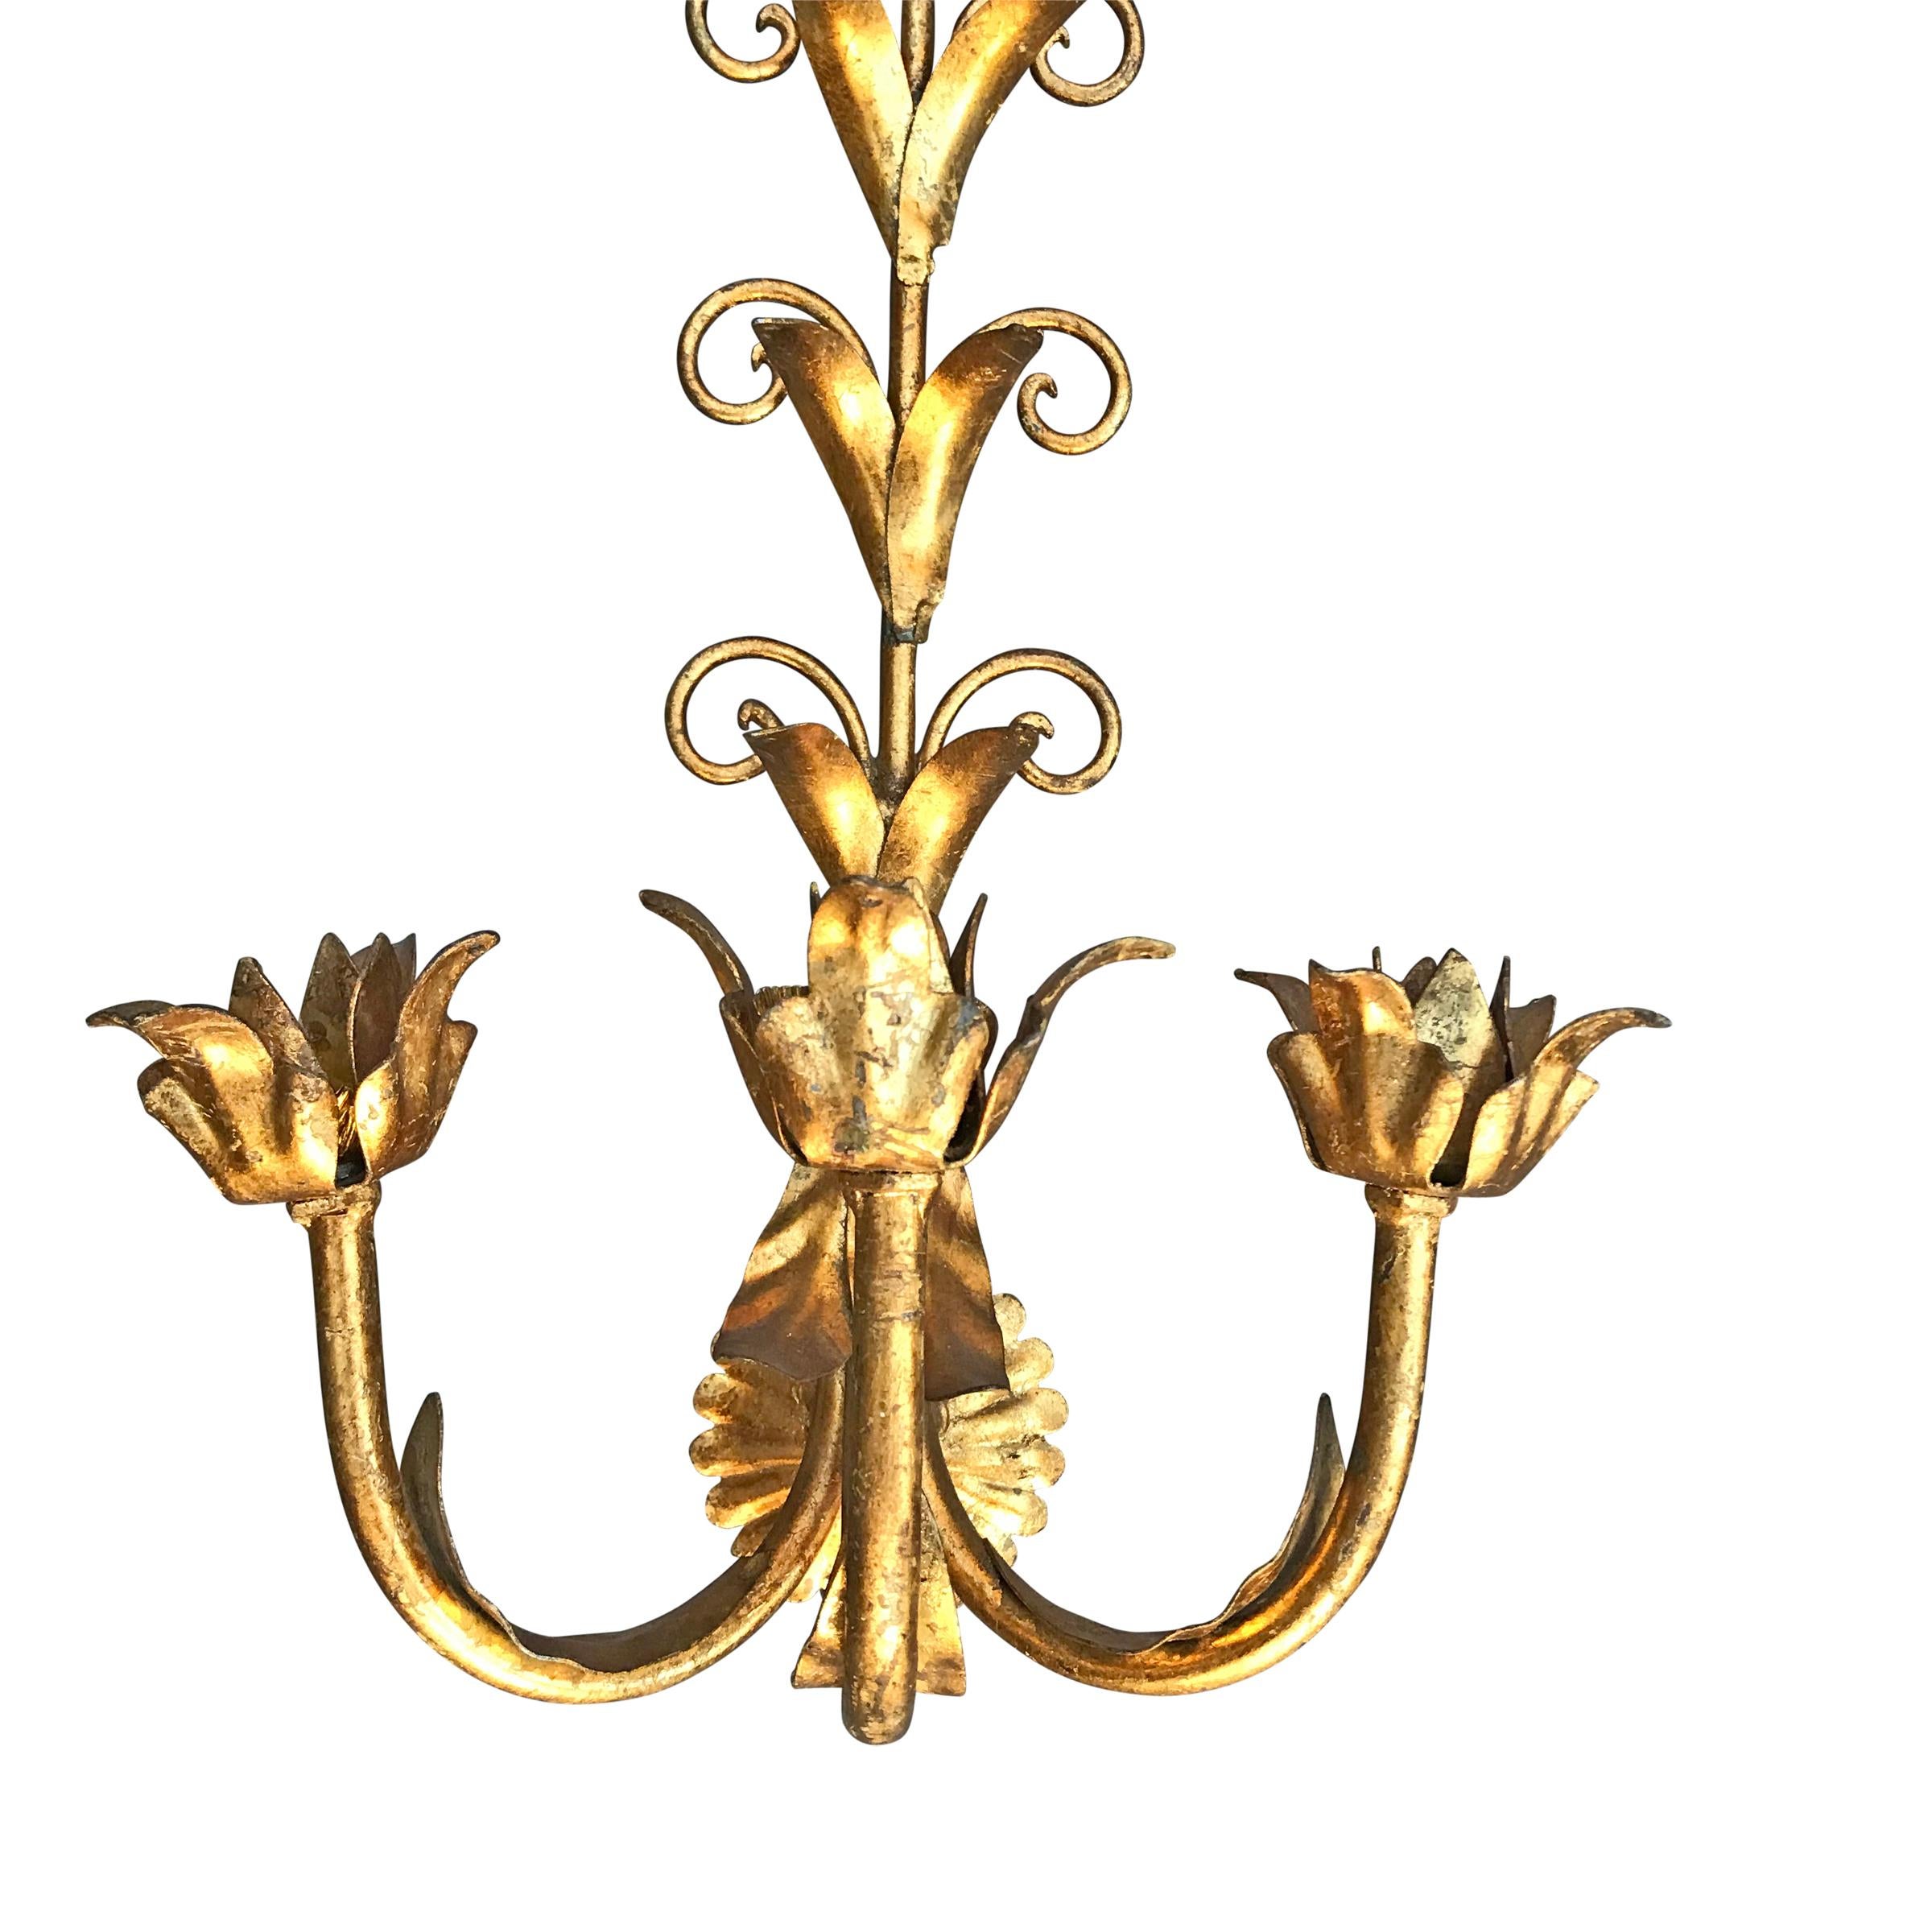 Hollywood Regency Pair of Vintage Italian Gilt Candle Sconces